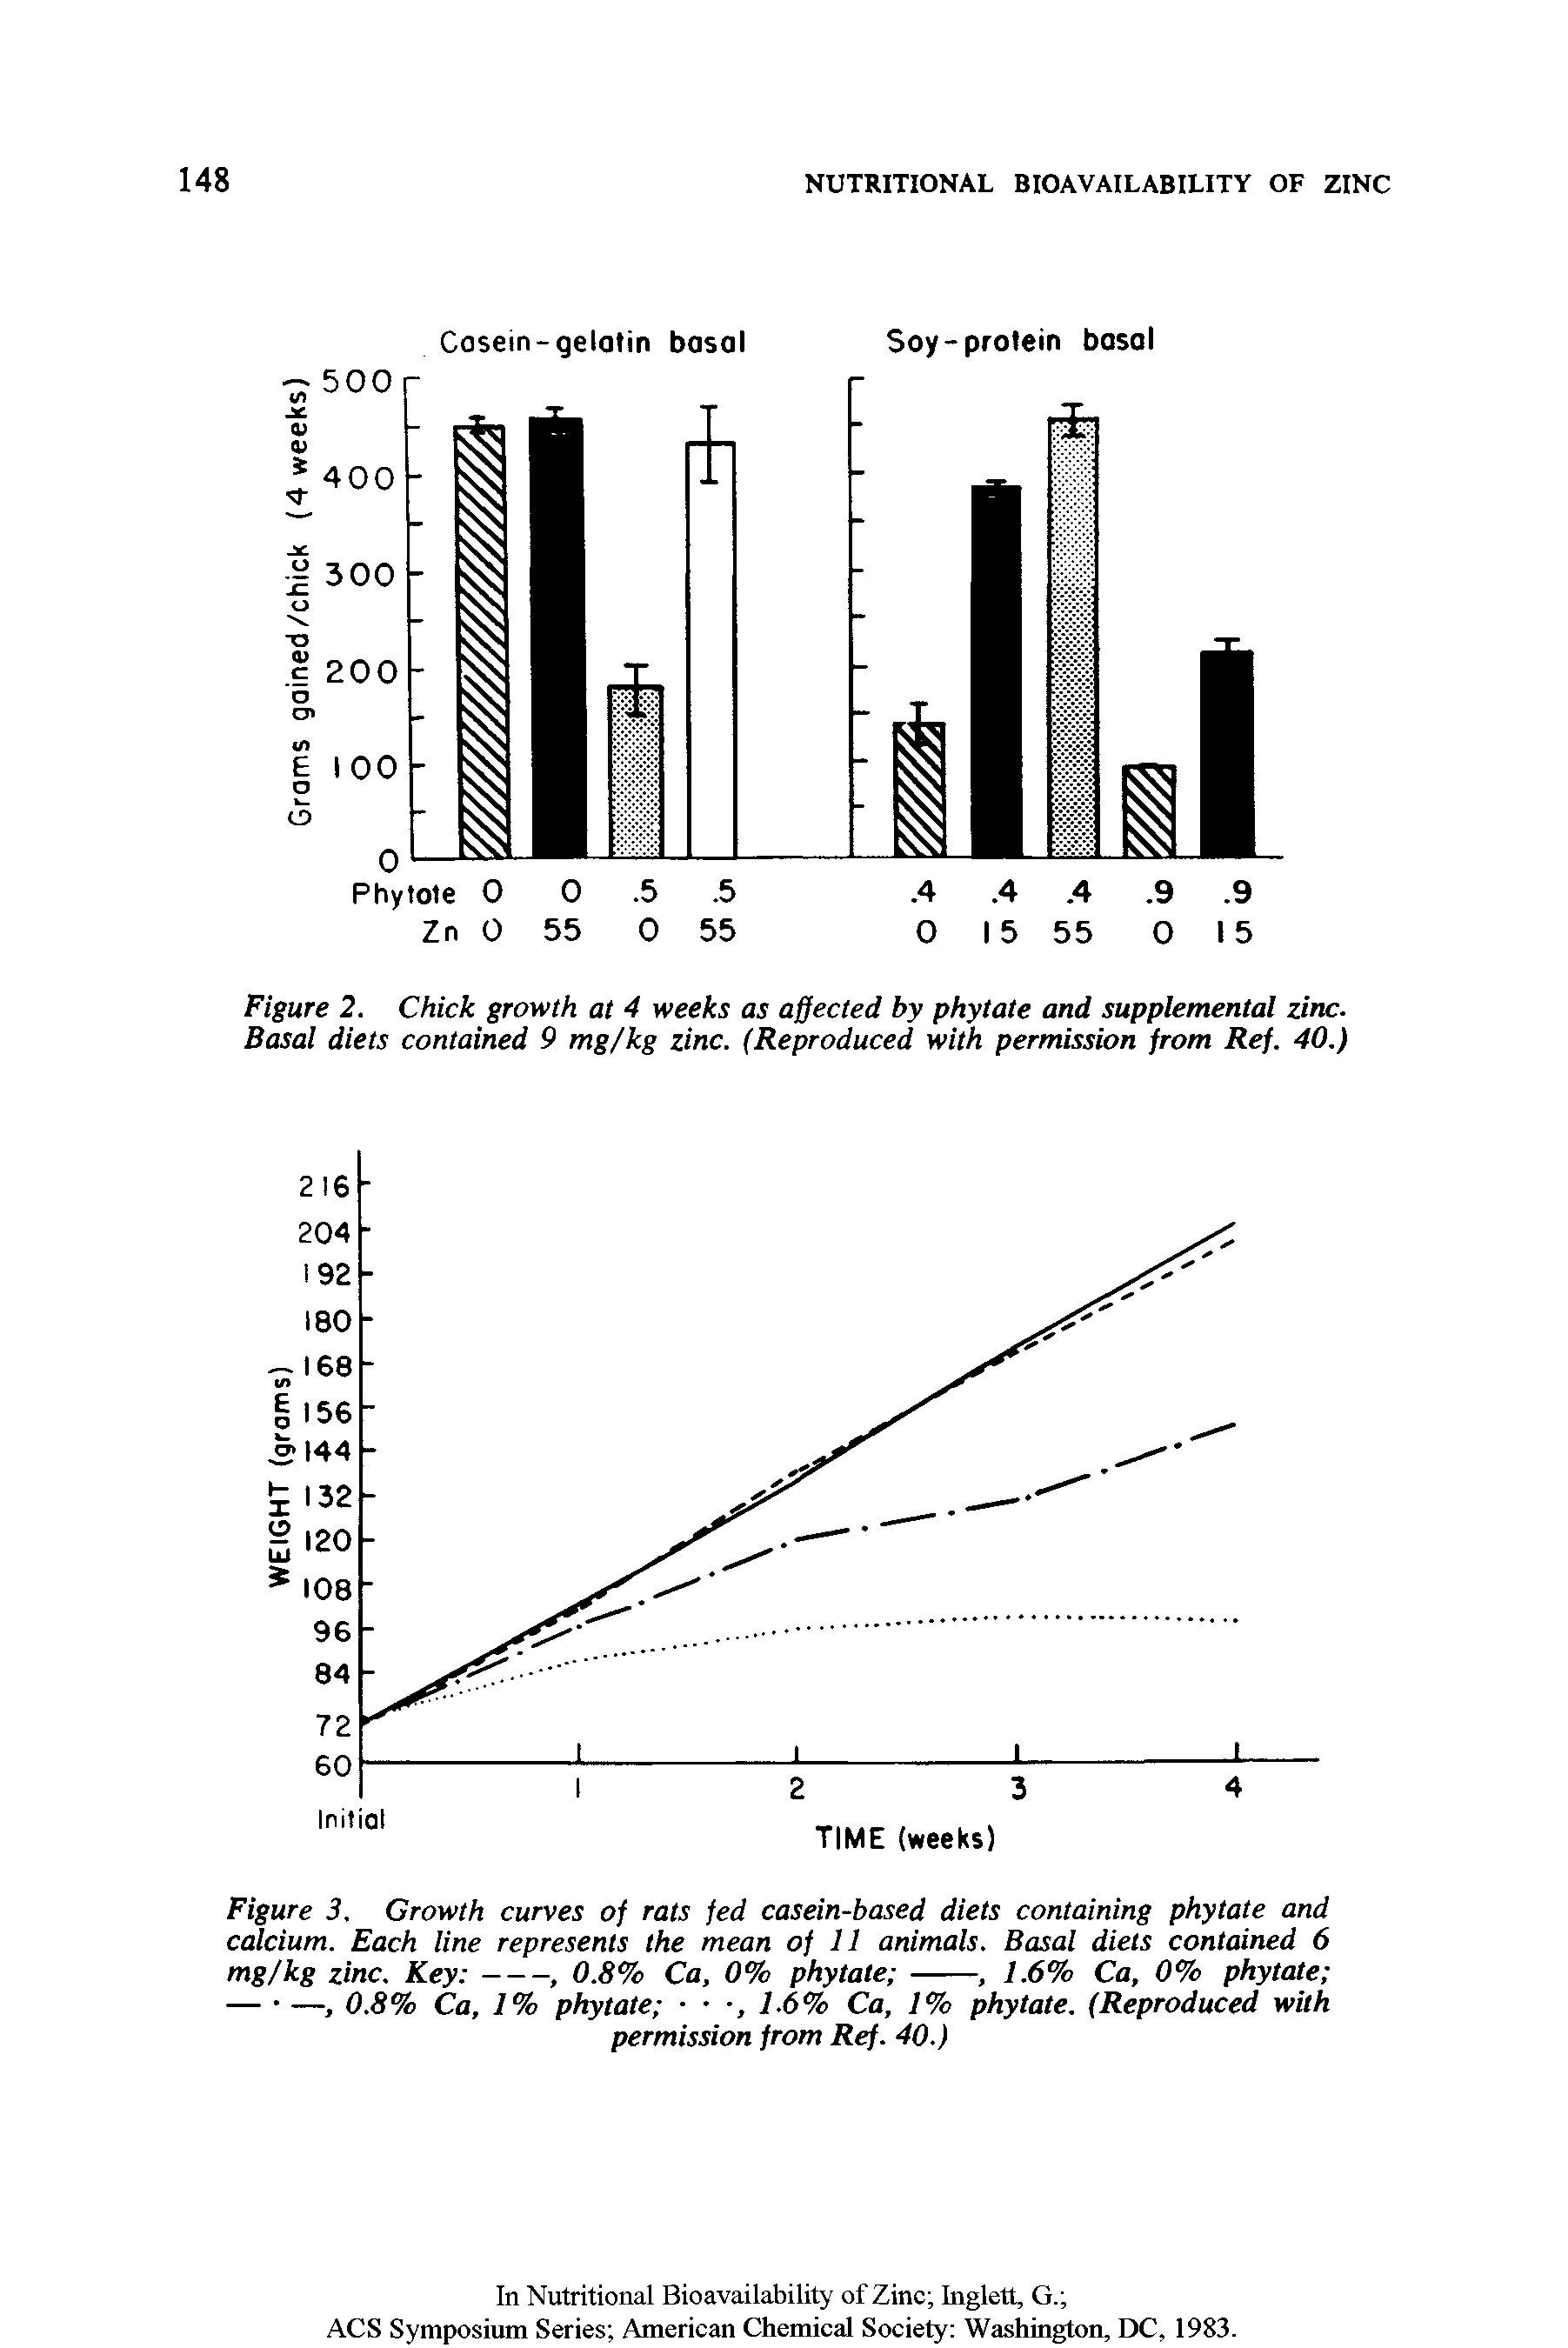 Figure 3. Growth curves of rats fed casein-based diets containing phytate and calcium. Each line represents the mean of 11 animals. Basal diets contained 6...